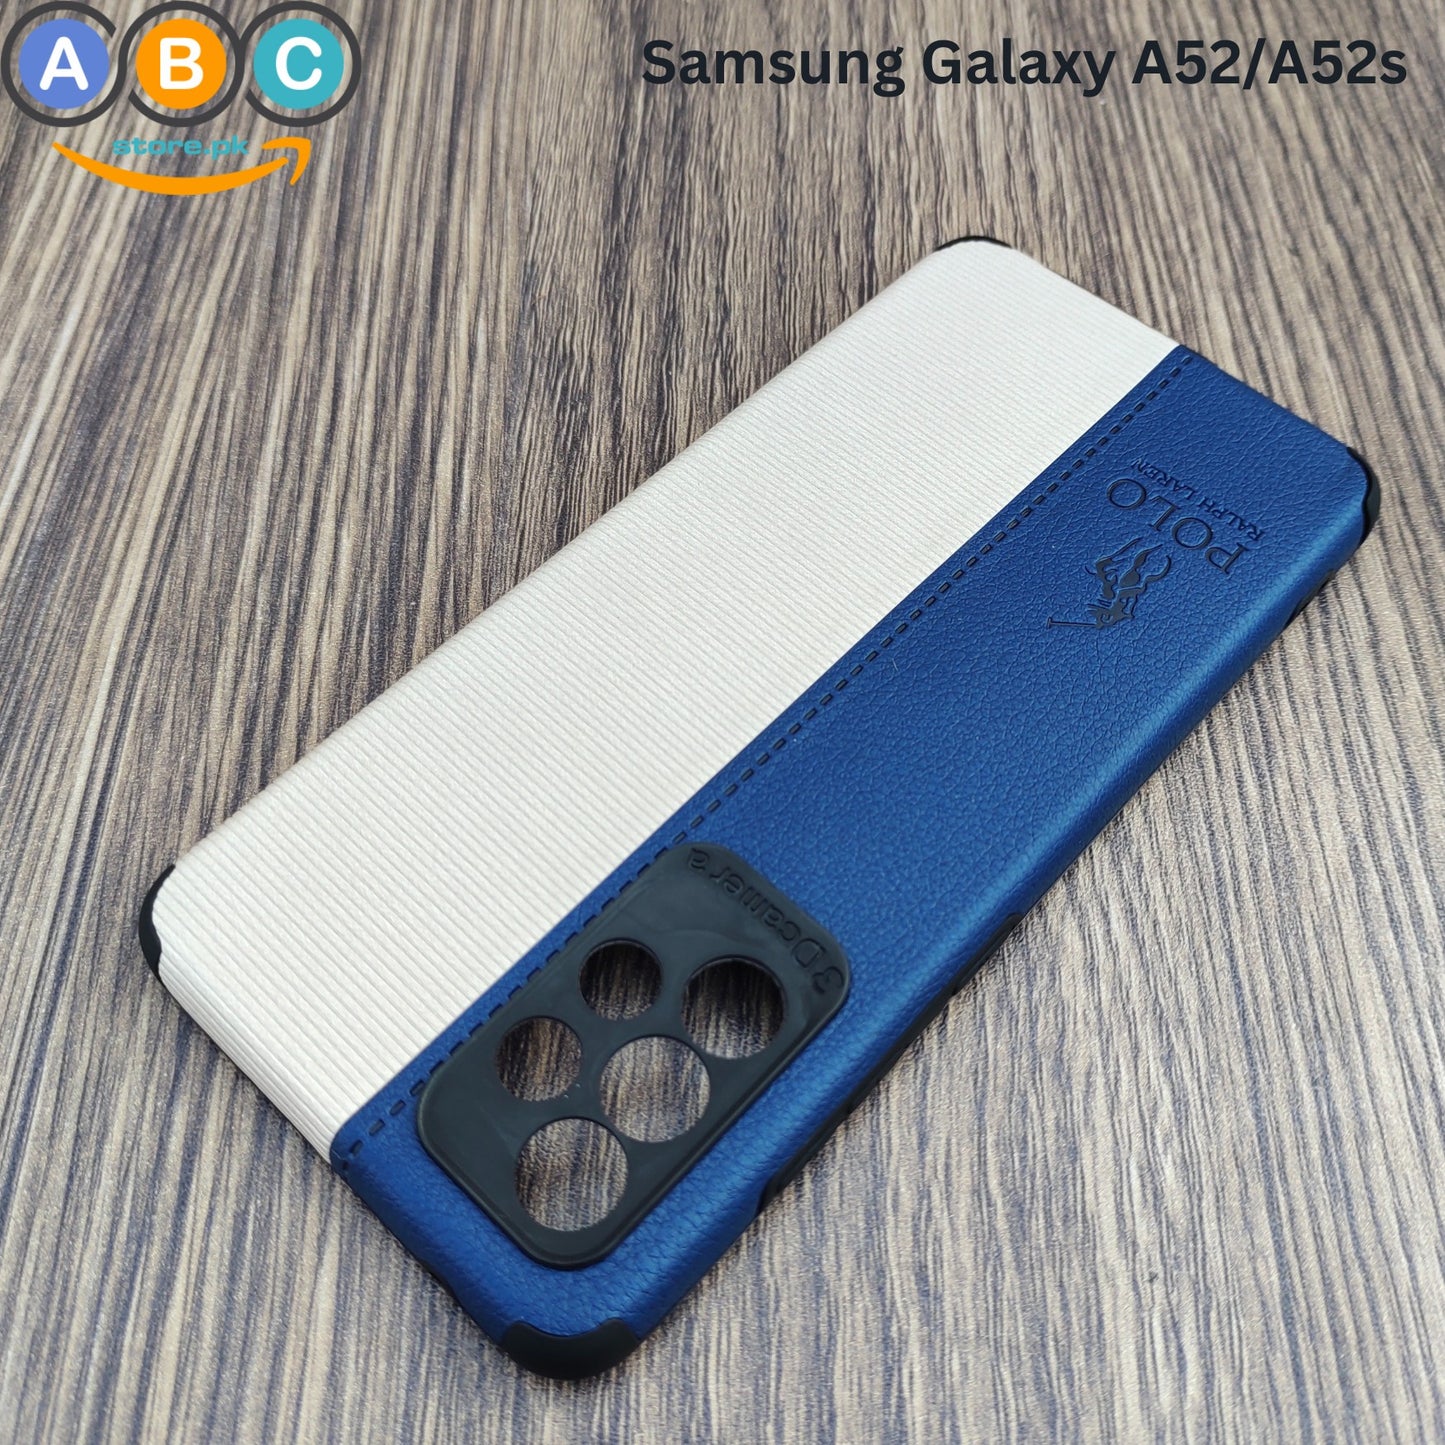 Samsung Galaxy A52/A52s Case, Polo Dual Pattern Leather Finish Back Cover